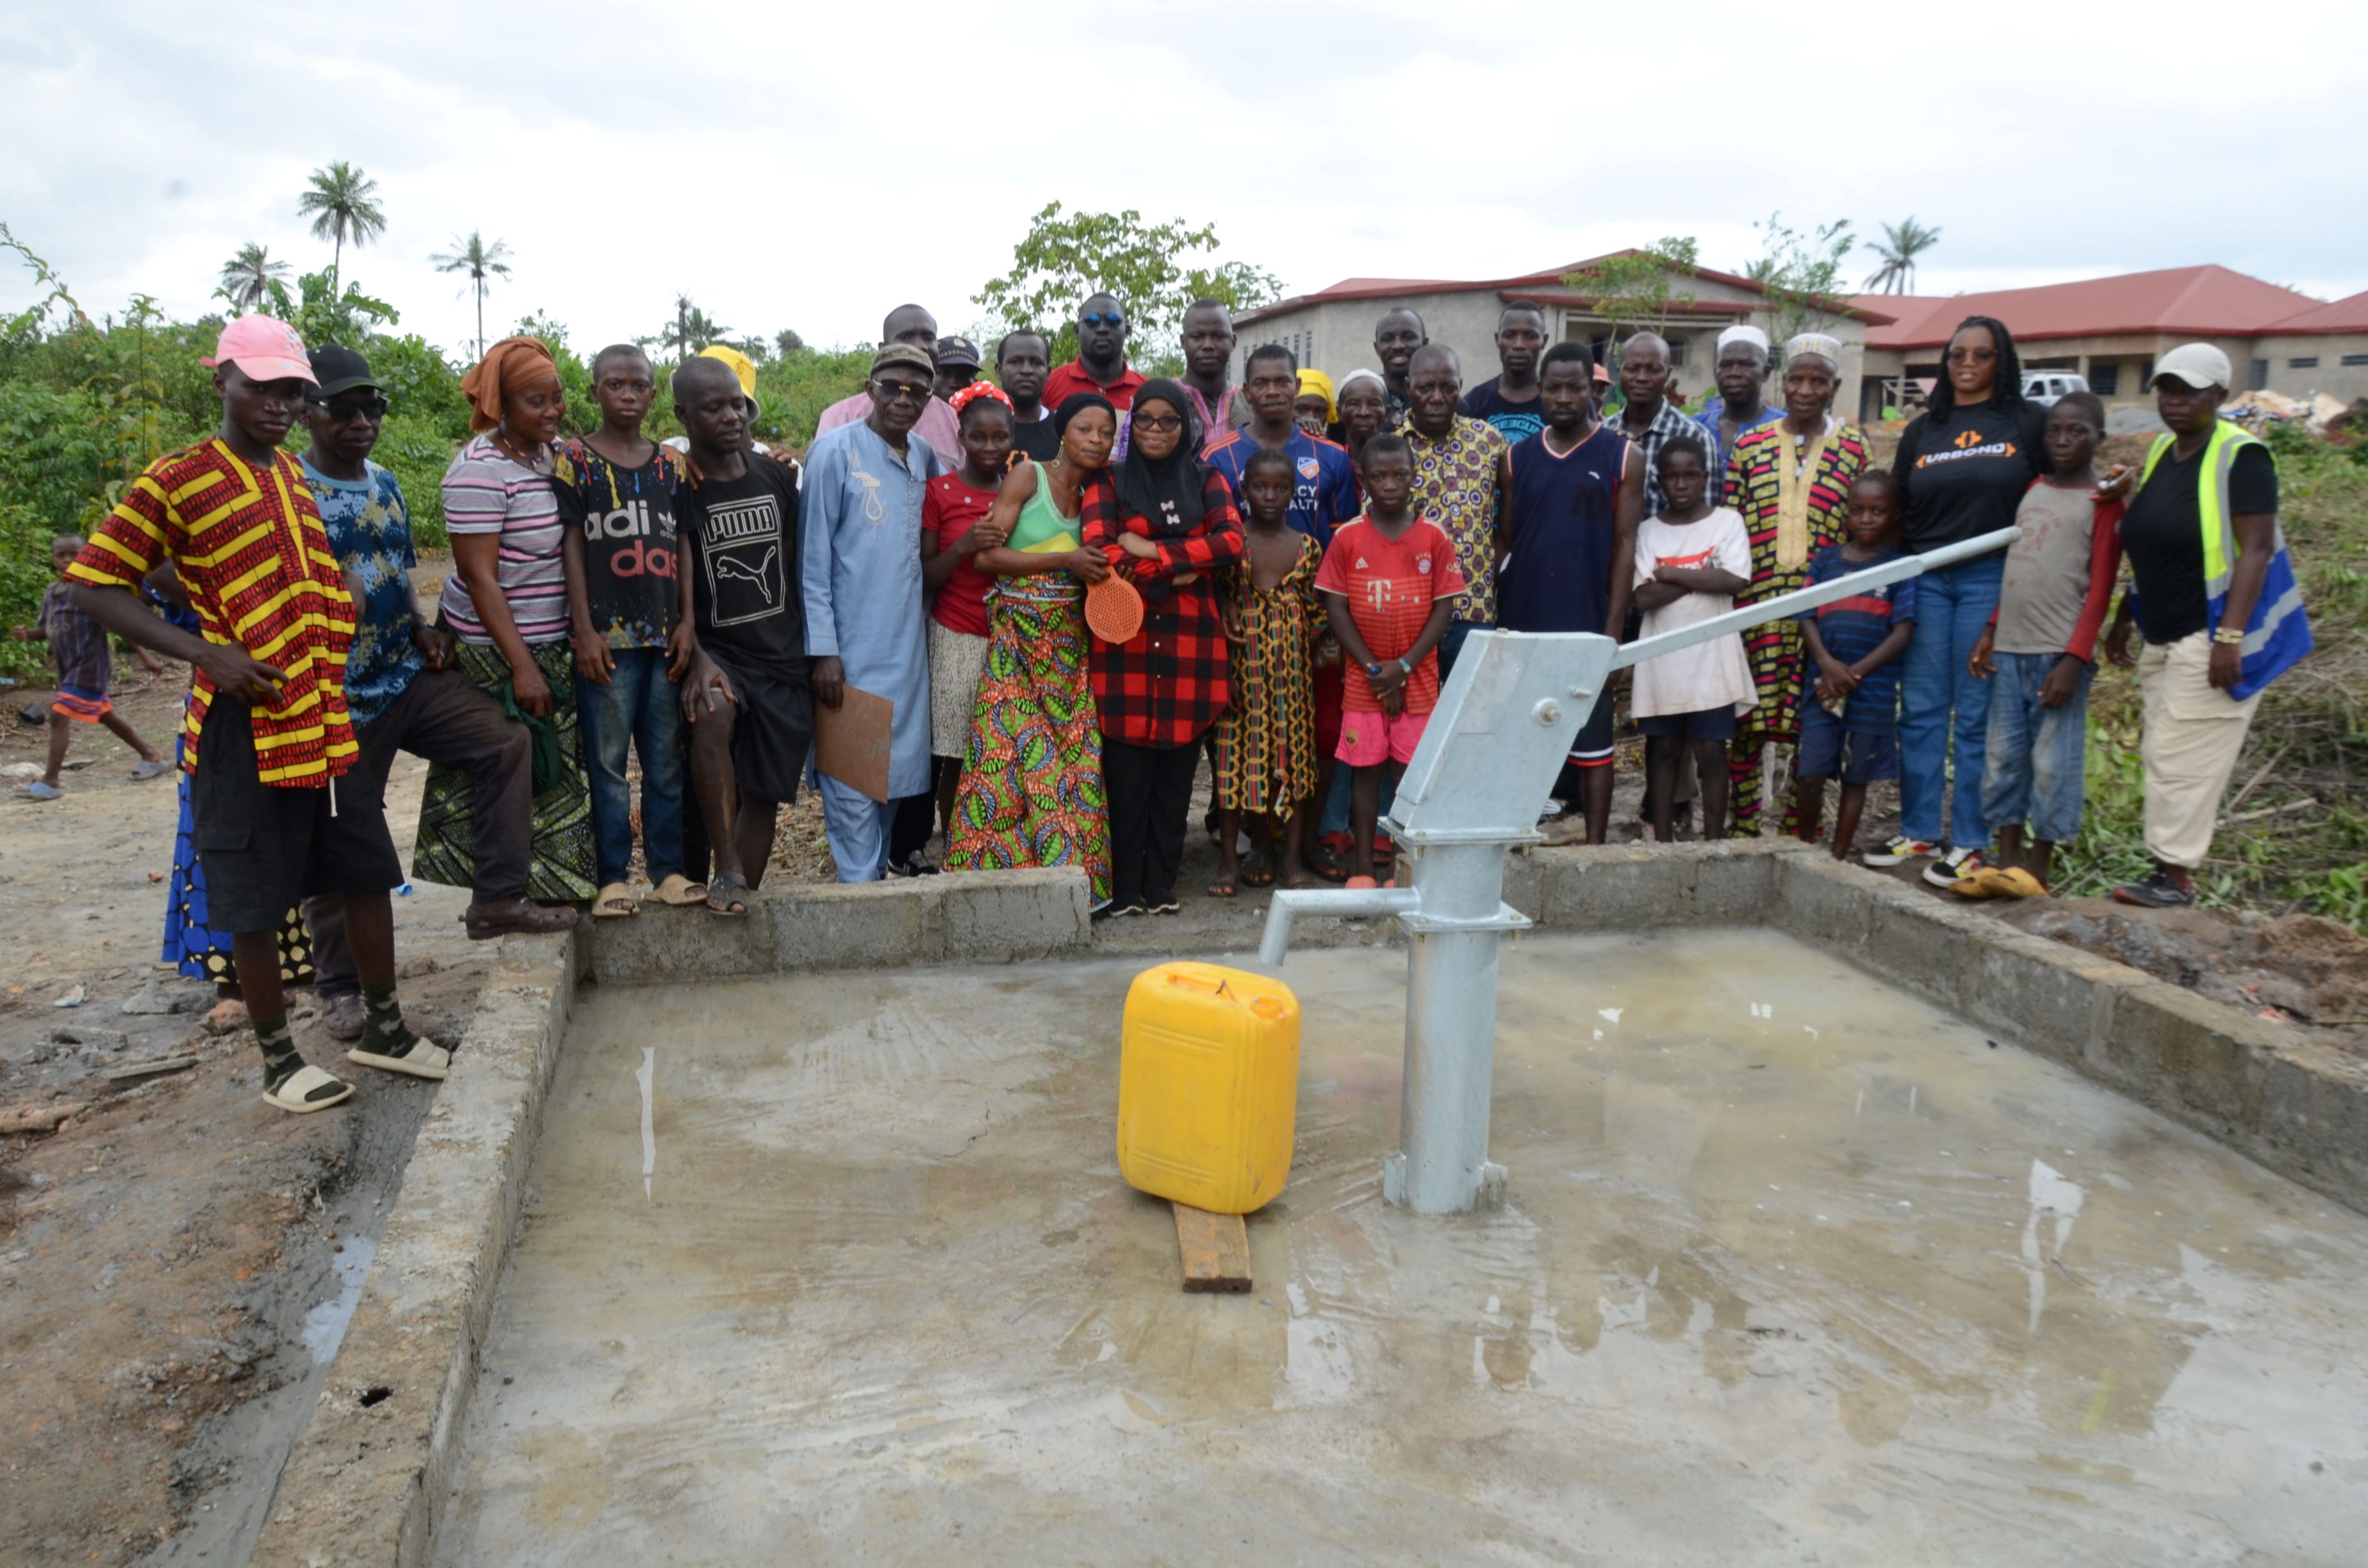 Providing Clean Water to a Community in Need